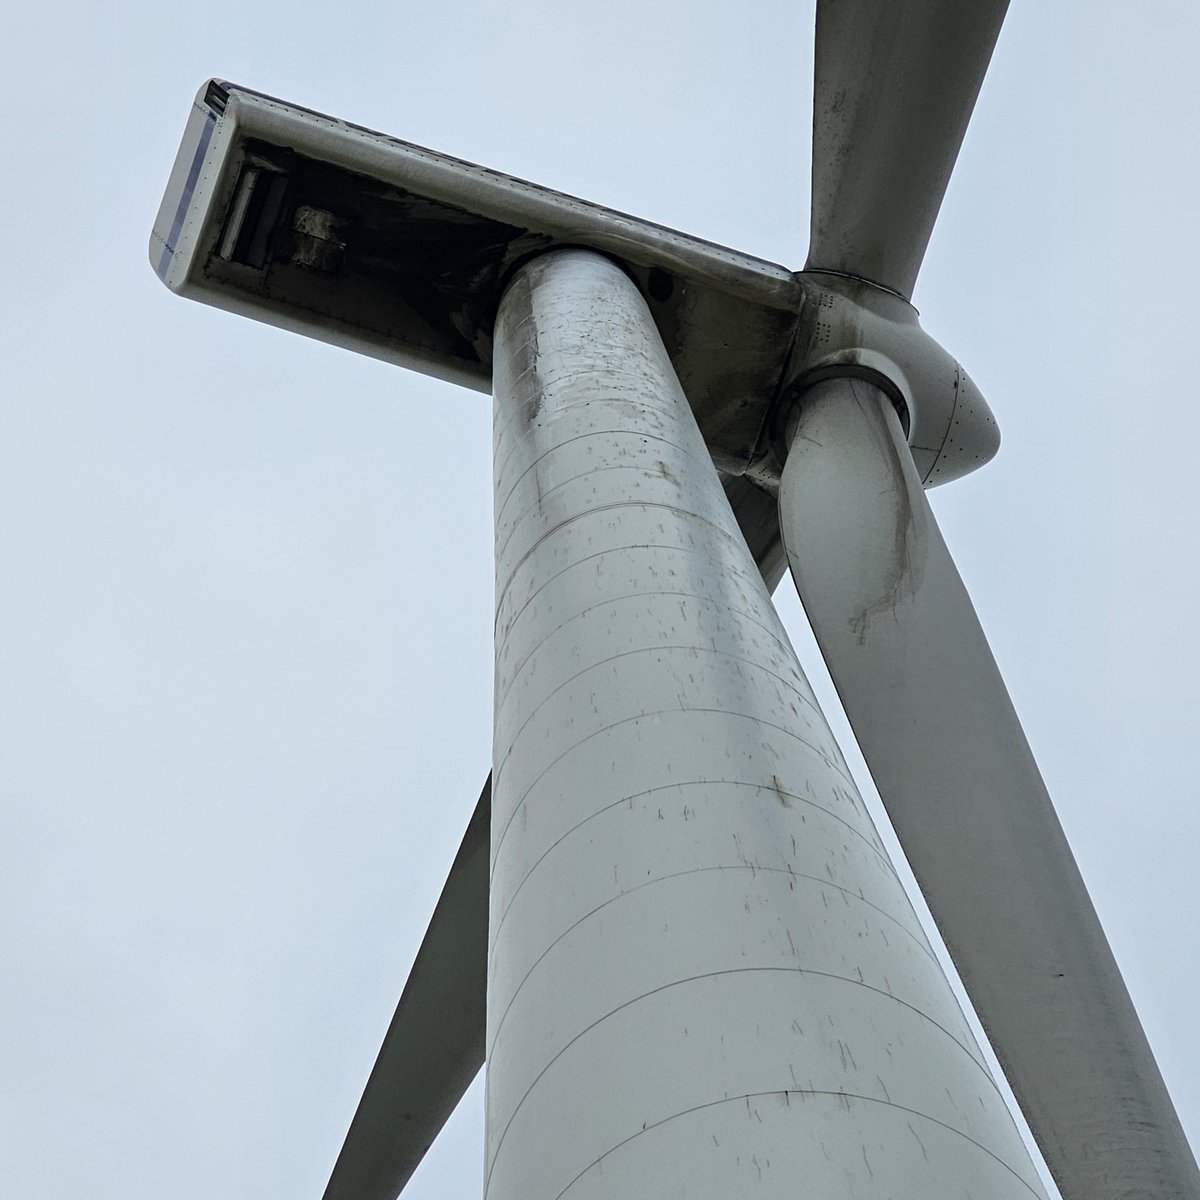 Went for a drive yesterday on some backroads west of town.
As we drove through a windfarm, I noticed most of the turbines dirty from the top towards the bottom.
Stopped and took a closer look. Hydraulic oil and gear oil leaking all over these units! 
This particular wind farm